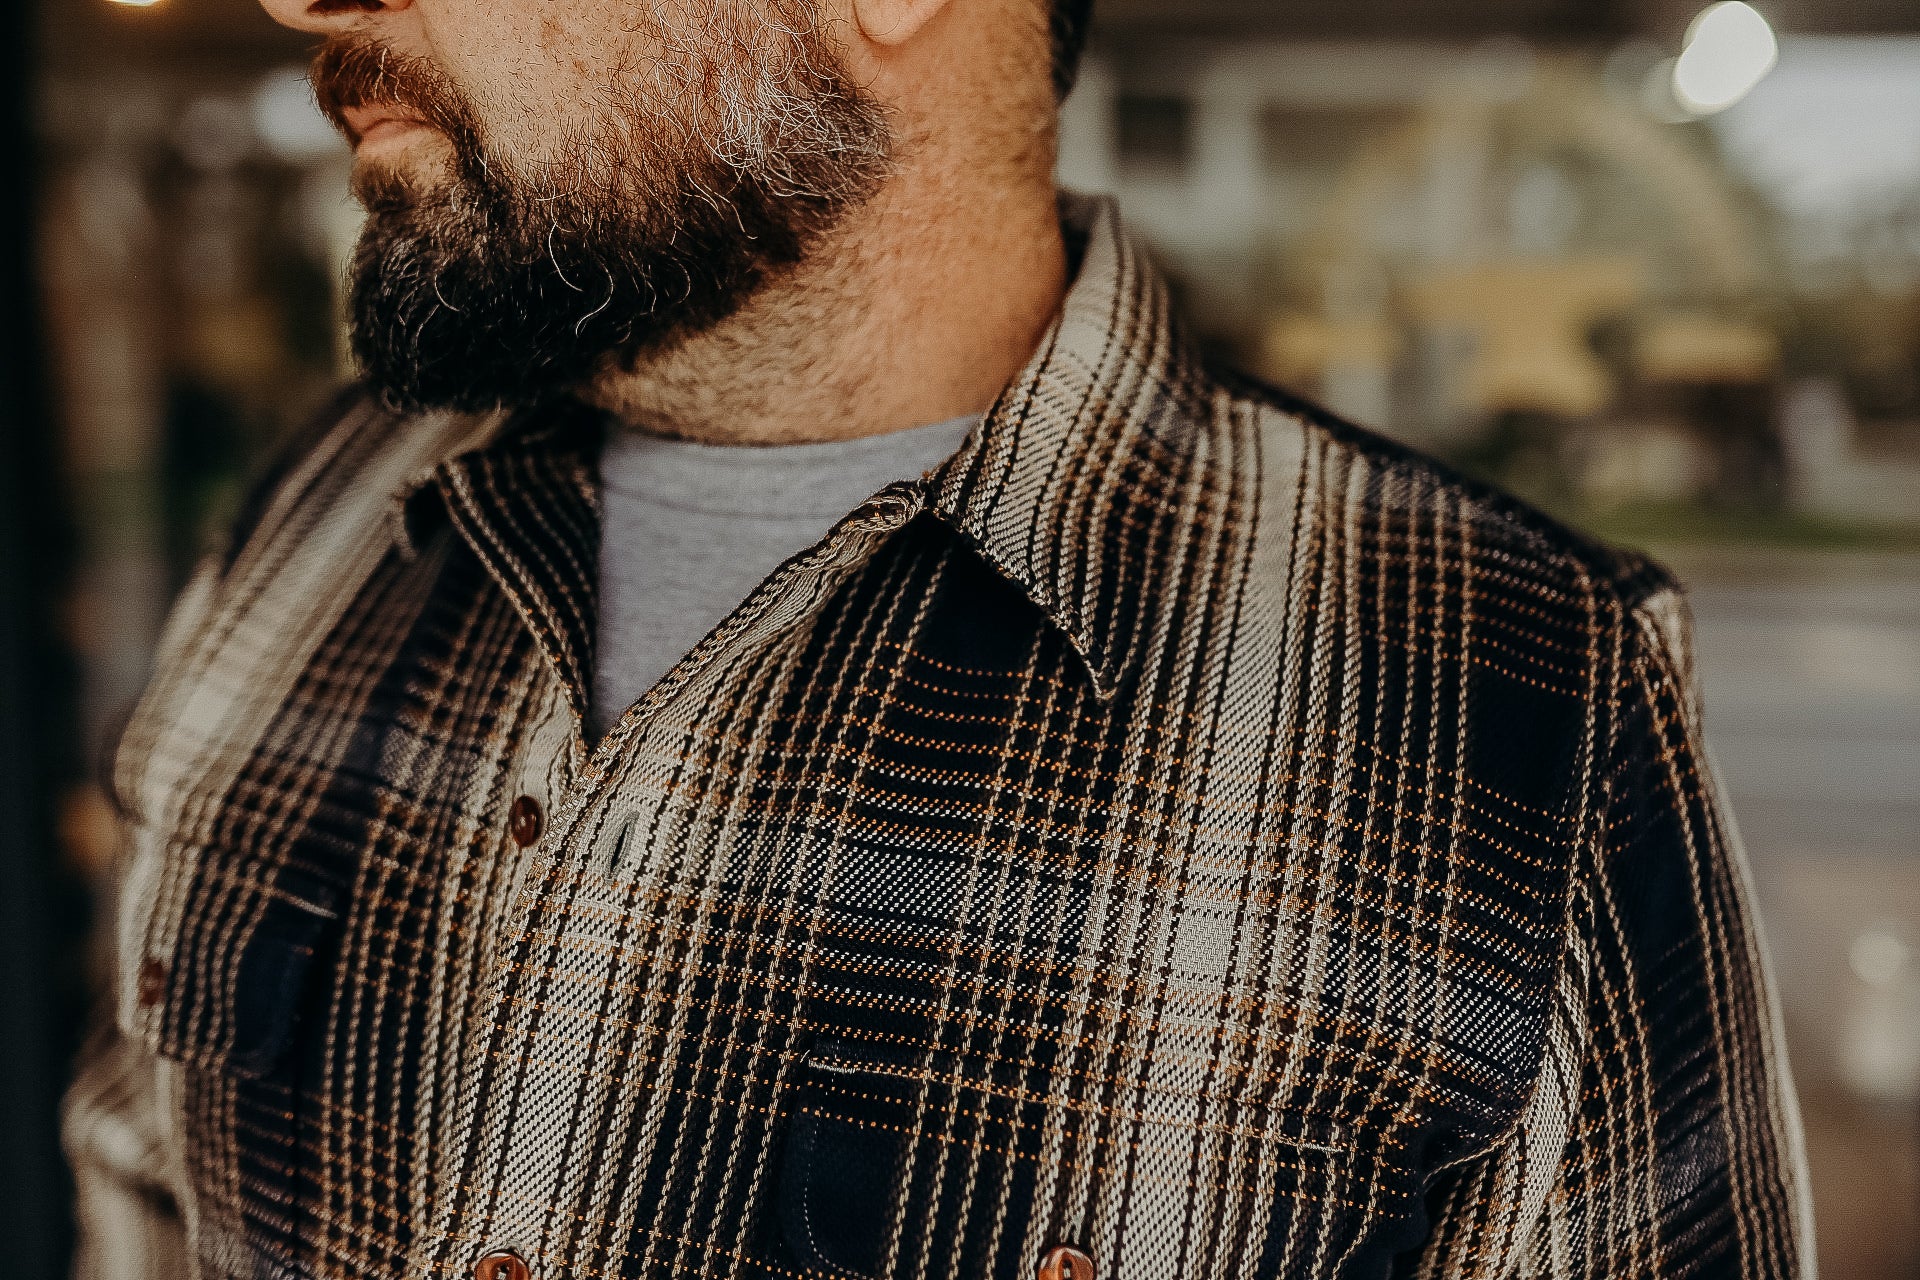 Webster Shirt, Twill Check, Navy/White/Yellow/Brown